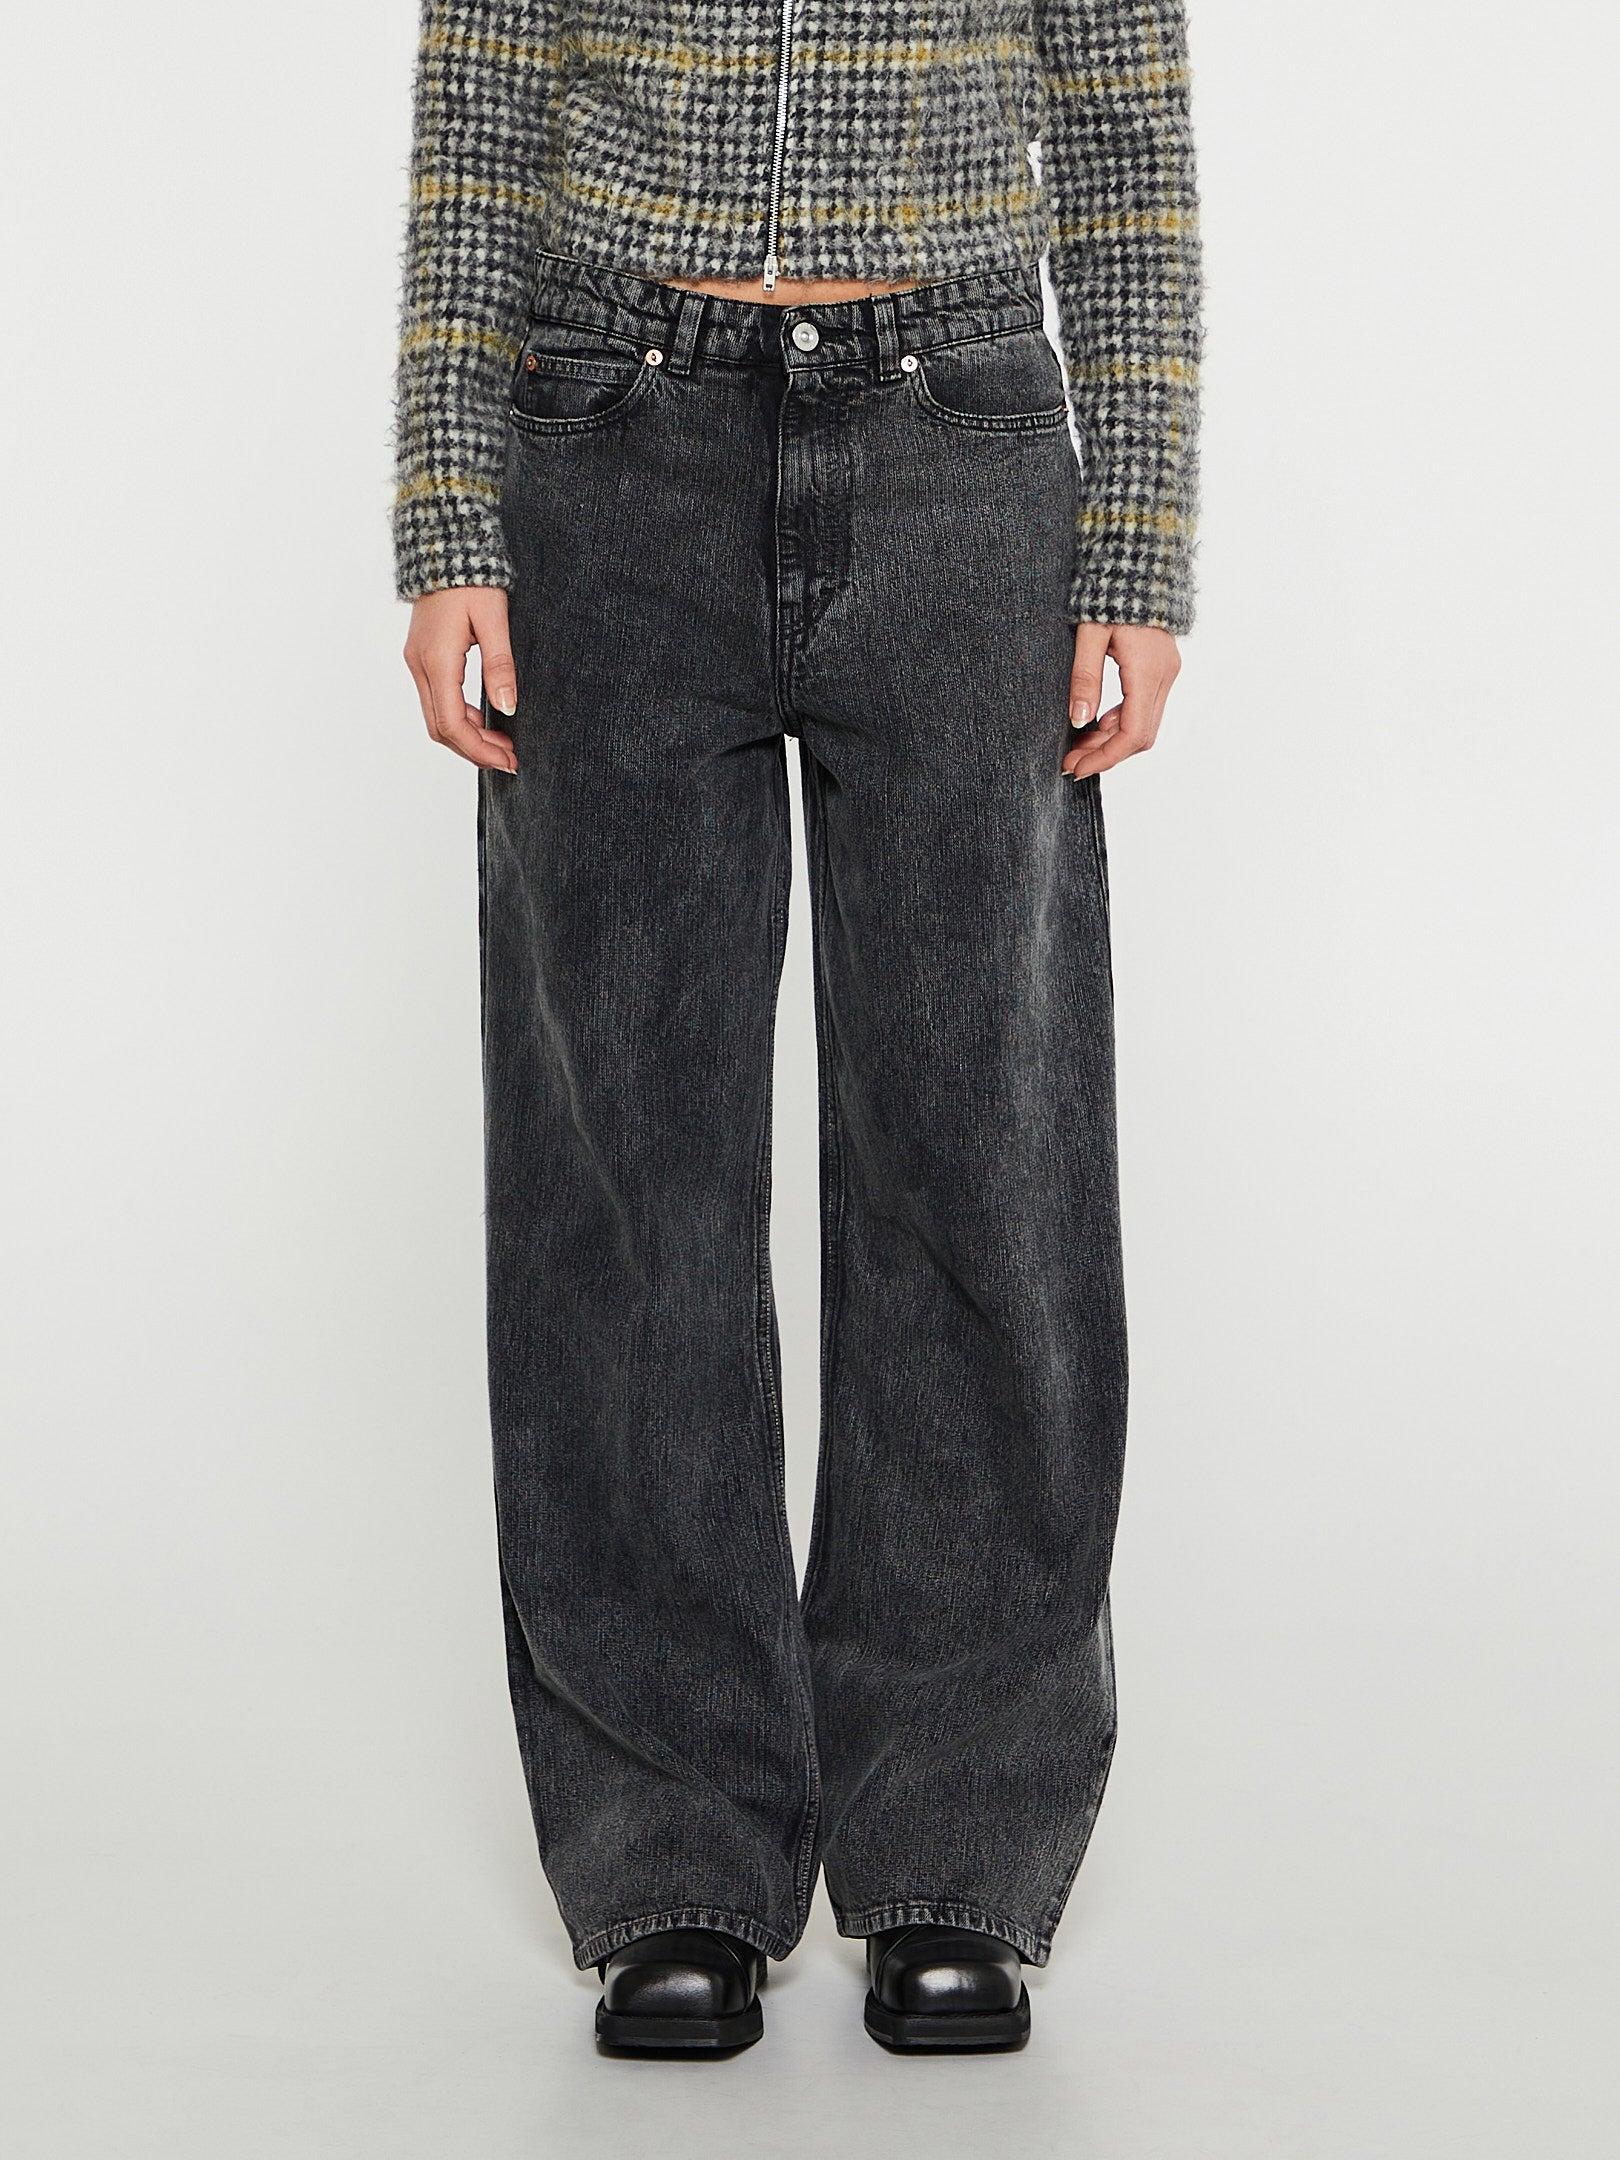 Our Legacy - Neo Cut Jeans in Overdyed Black Chain Twill